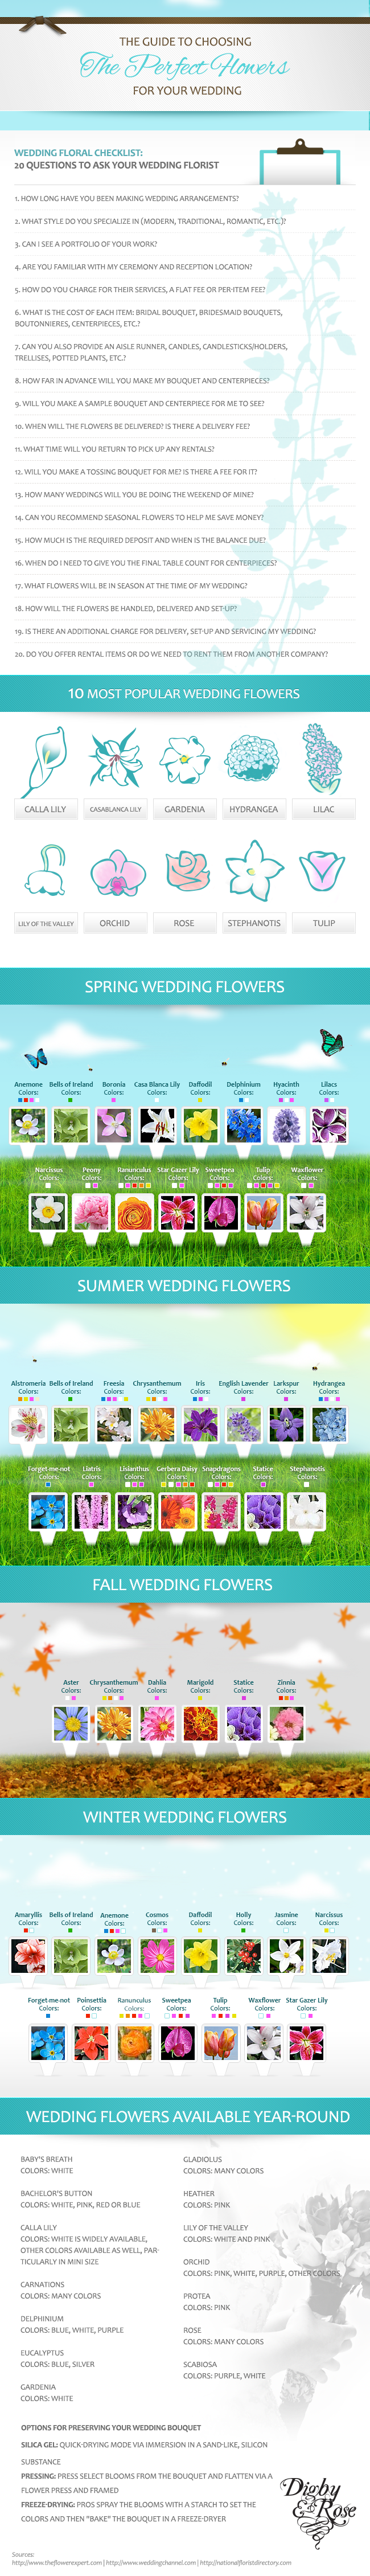 Guide to choosing the perfect wedding flowers